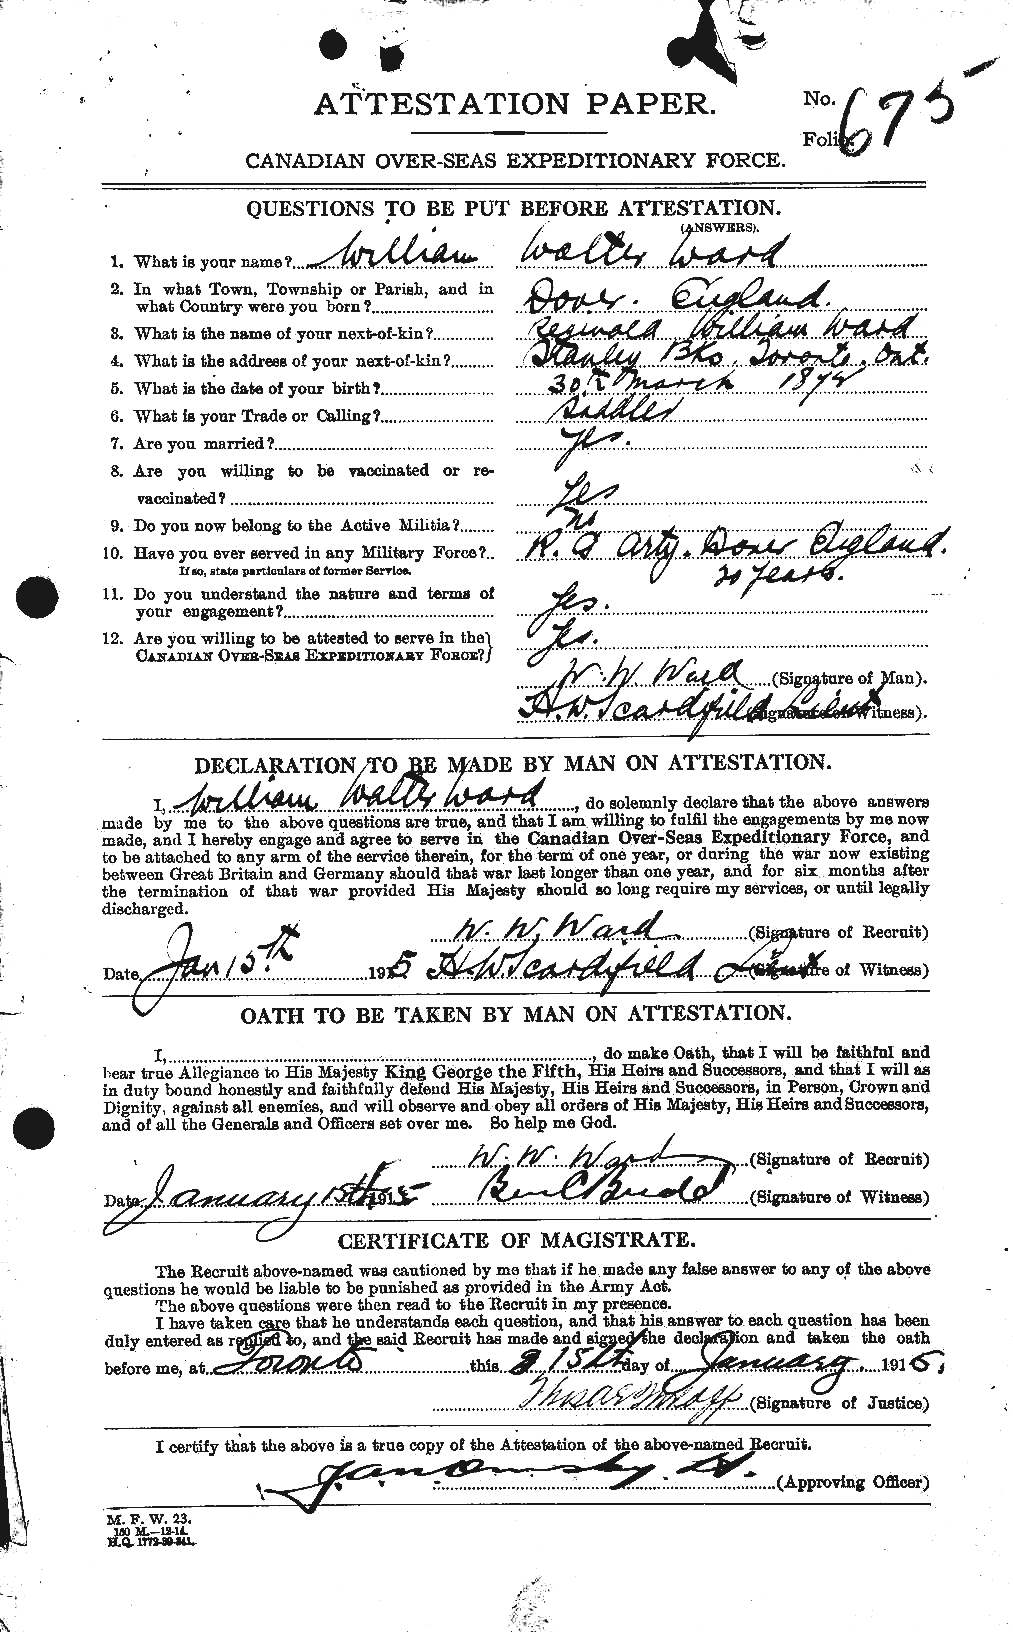 Personnel Records of the First World War - CEF 659845a